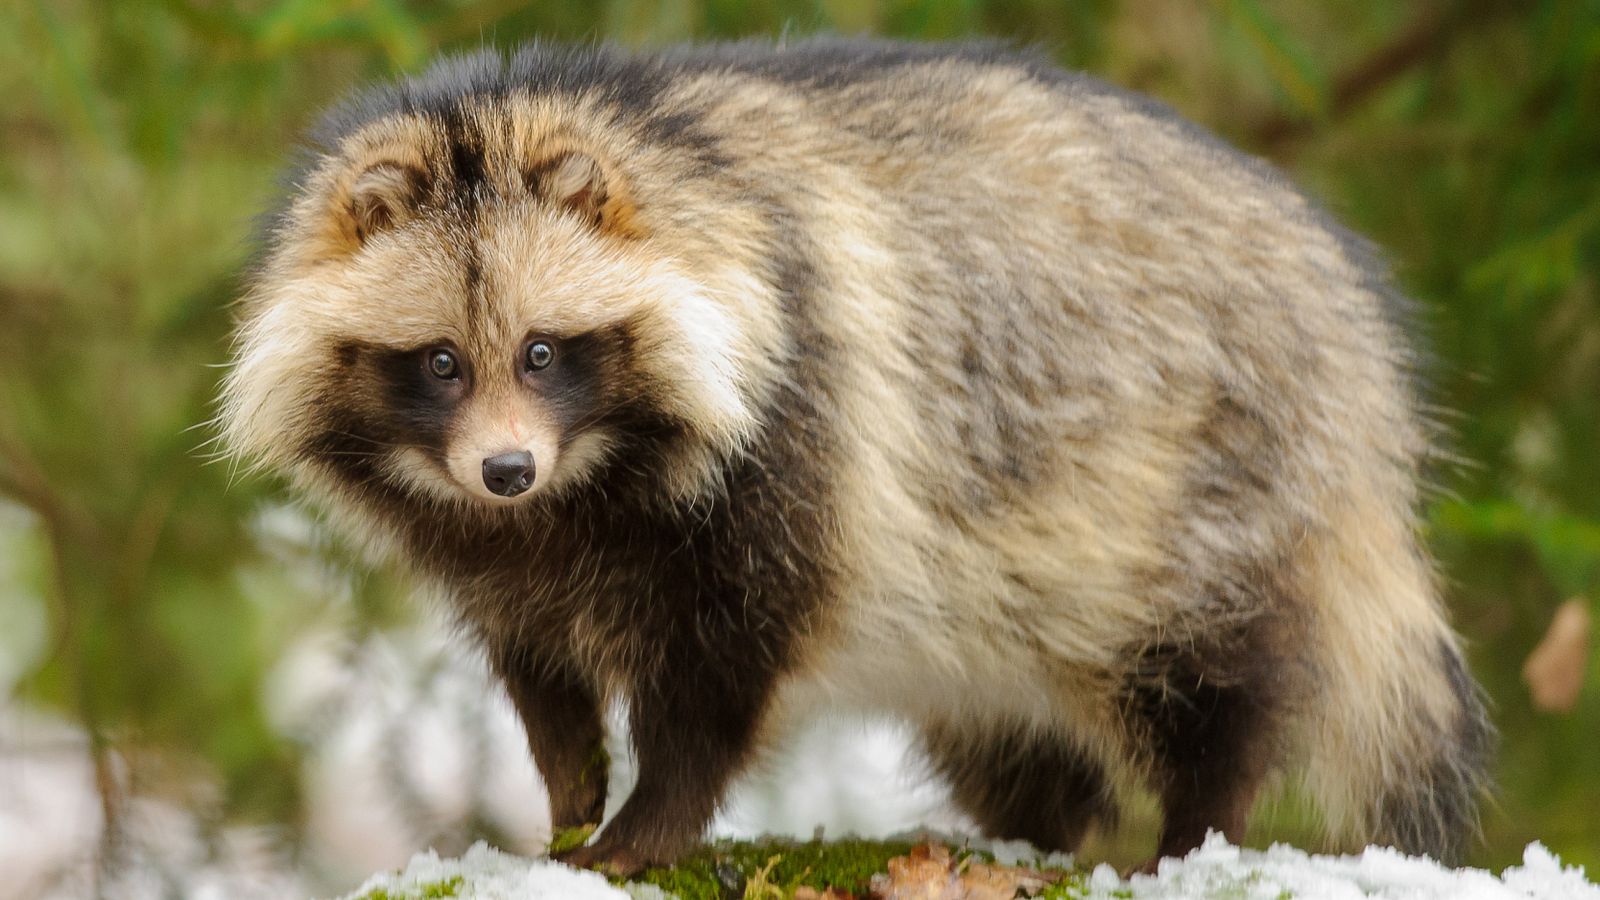 Raccoon dogs at Wuhan market linked to COVID origins in new study